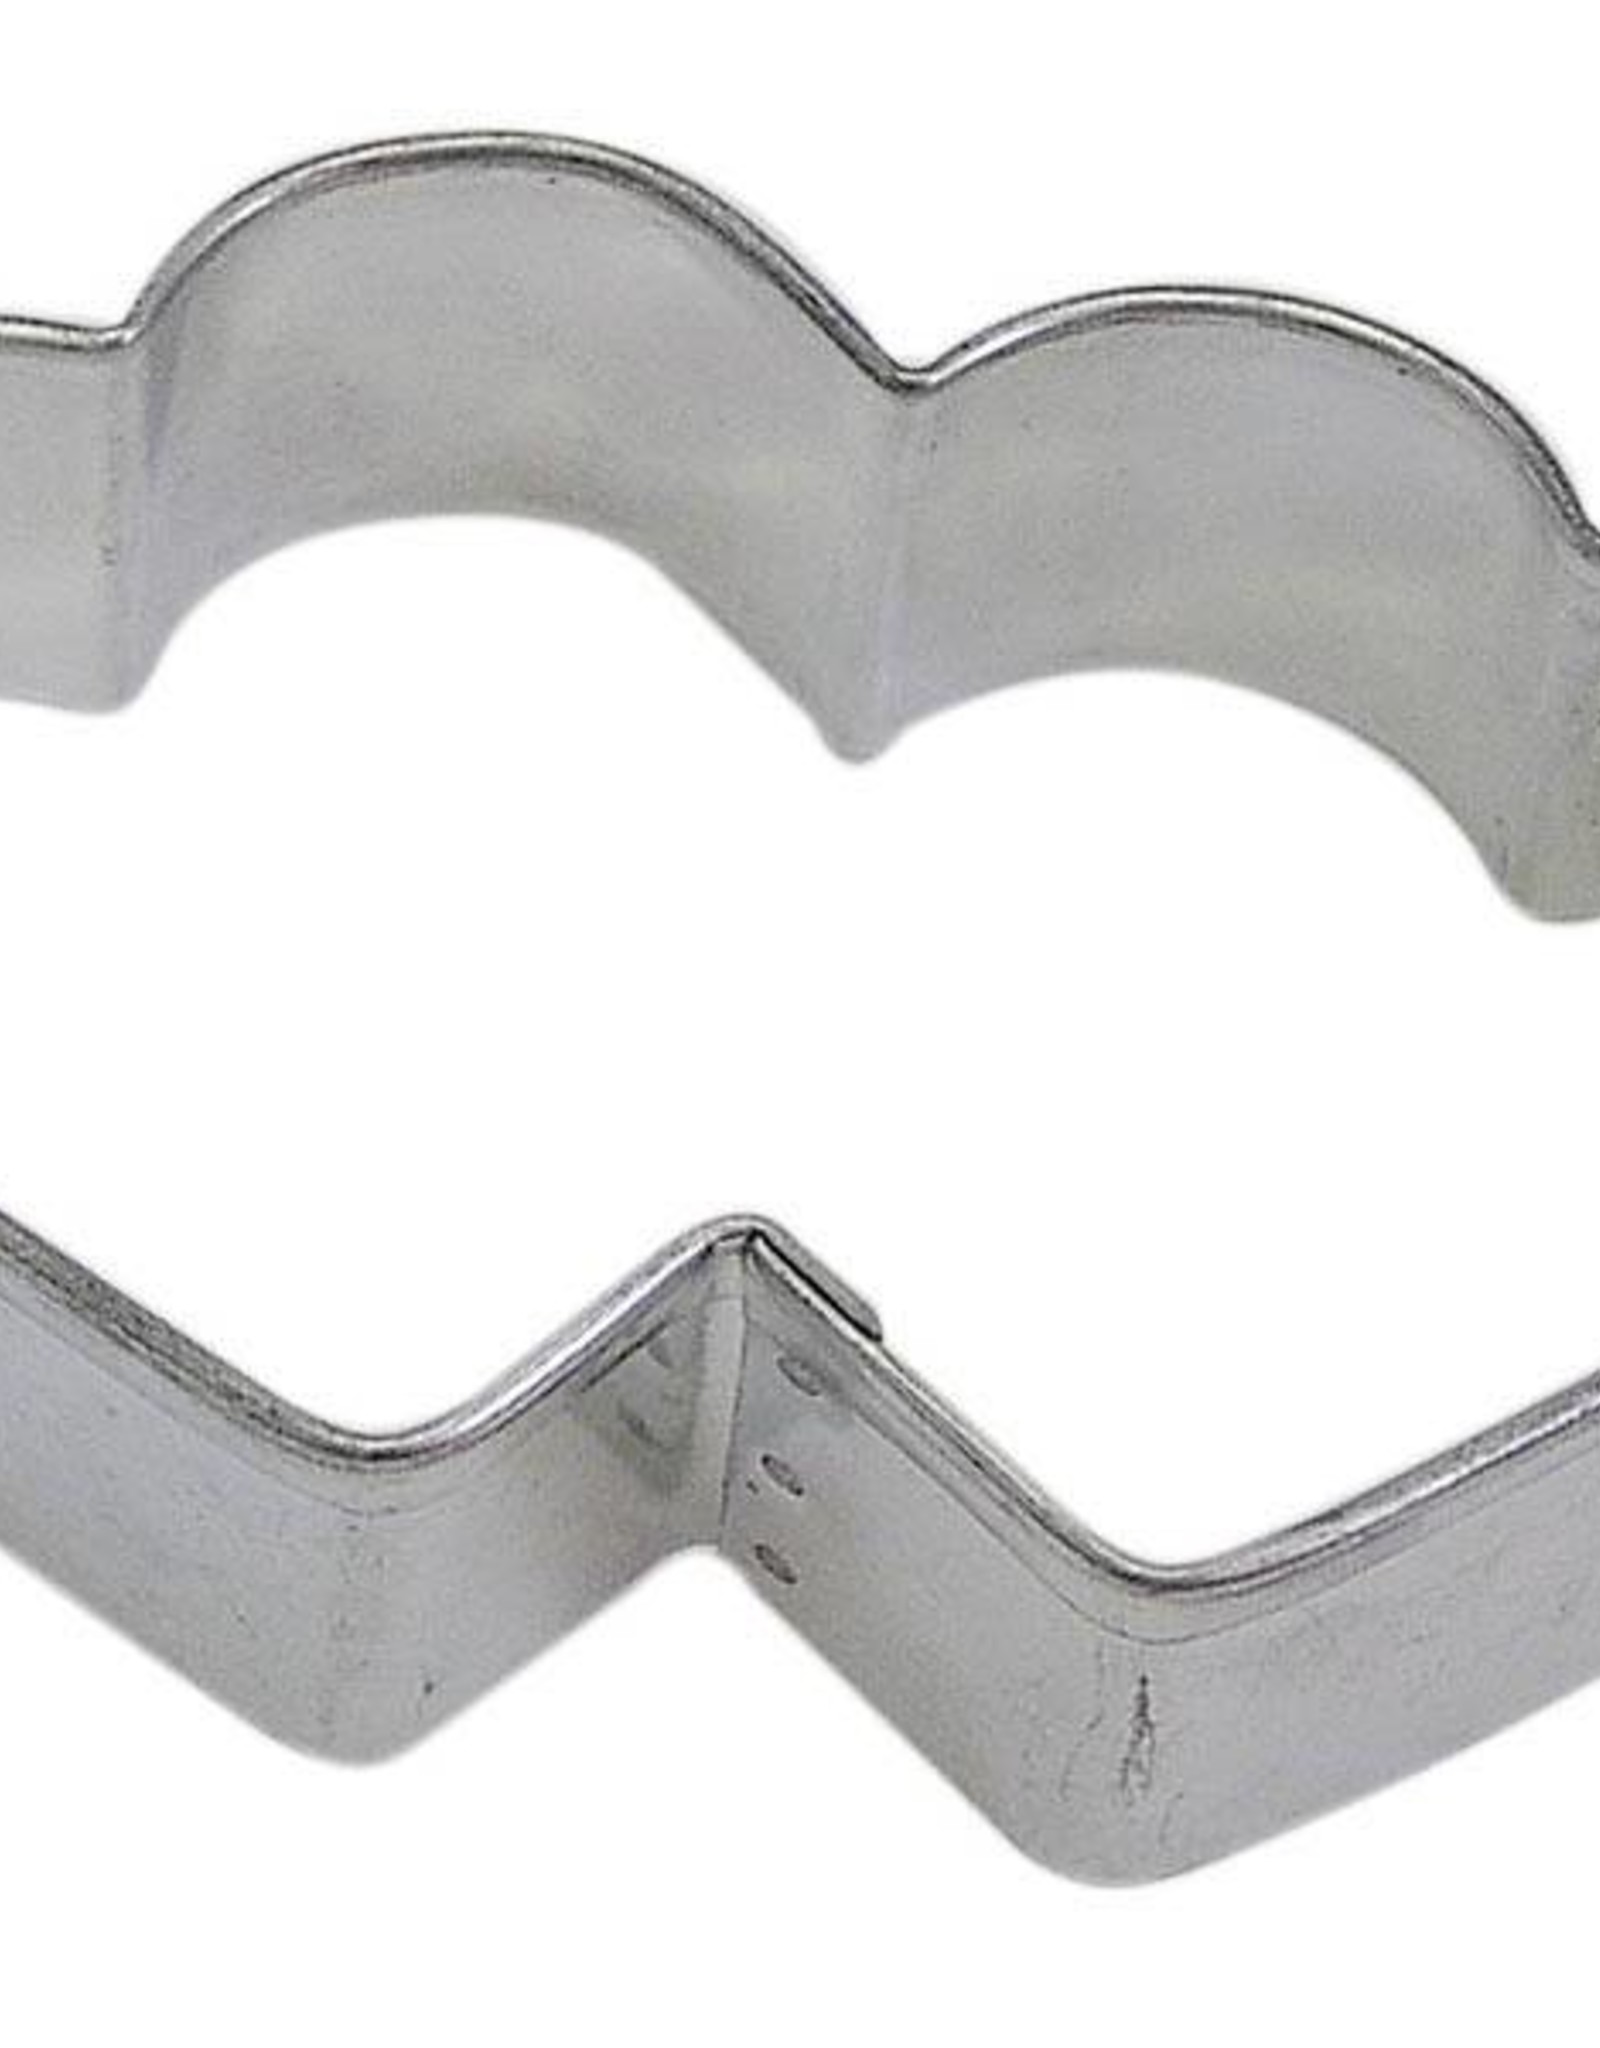 Double Heart Cookie Cutter (5.25")